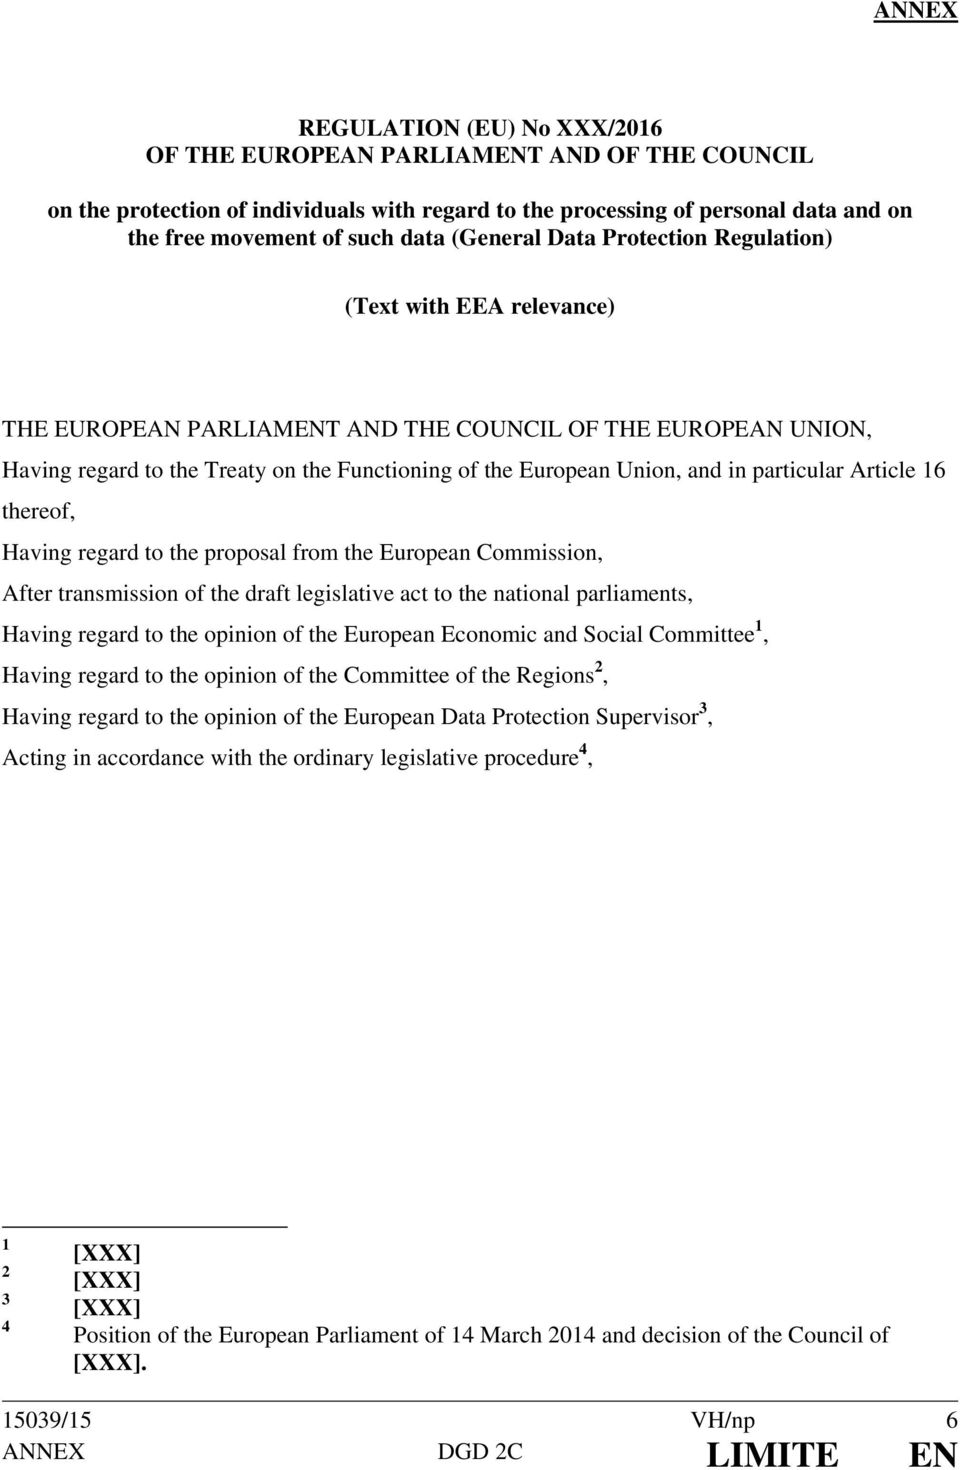 in particular Article 16 thereof, Having regard to the proposal from the European Commission, After transmission of the draft legislative act to the national parliaments, Having regard to the opinion